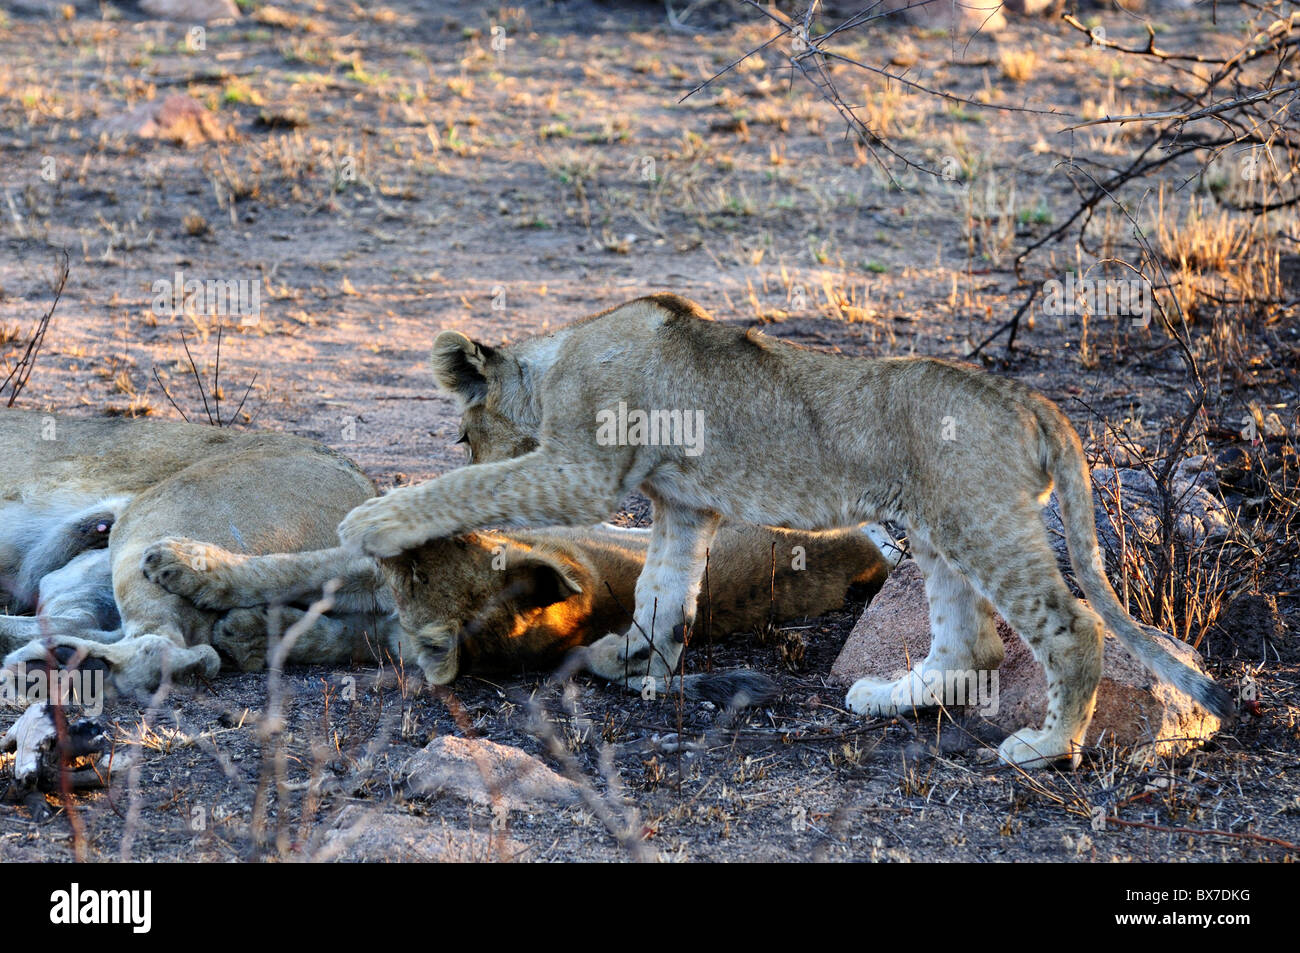 Two young lion cubs playing with each other. Kruger National Park, South Africa. Stock Photo